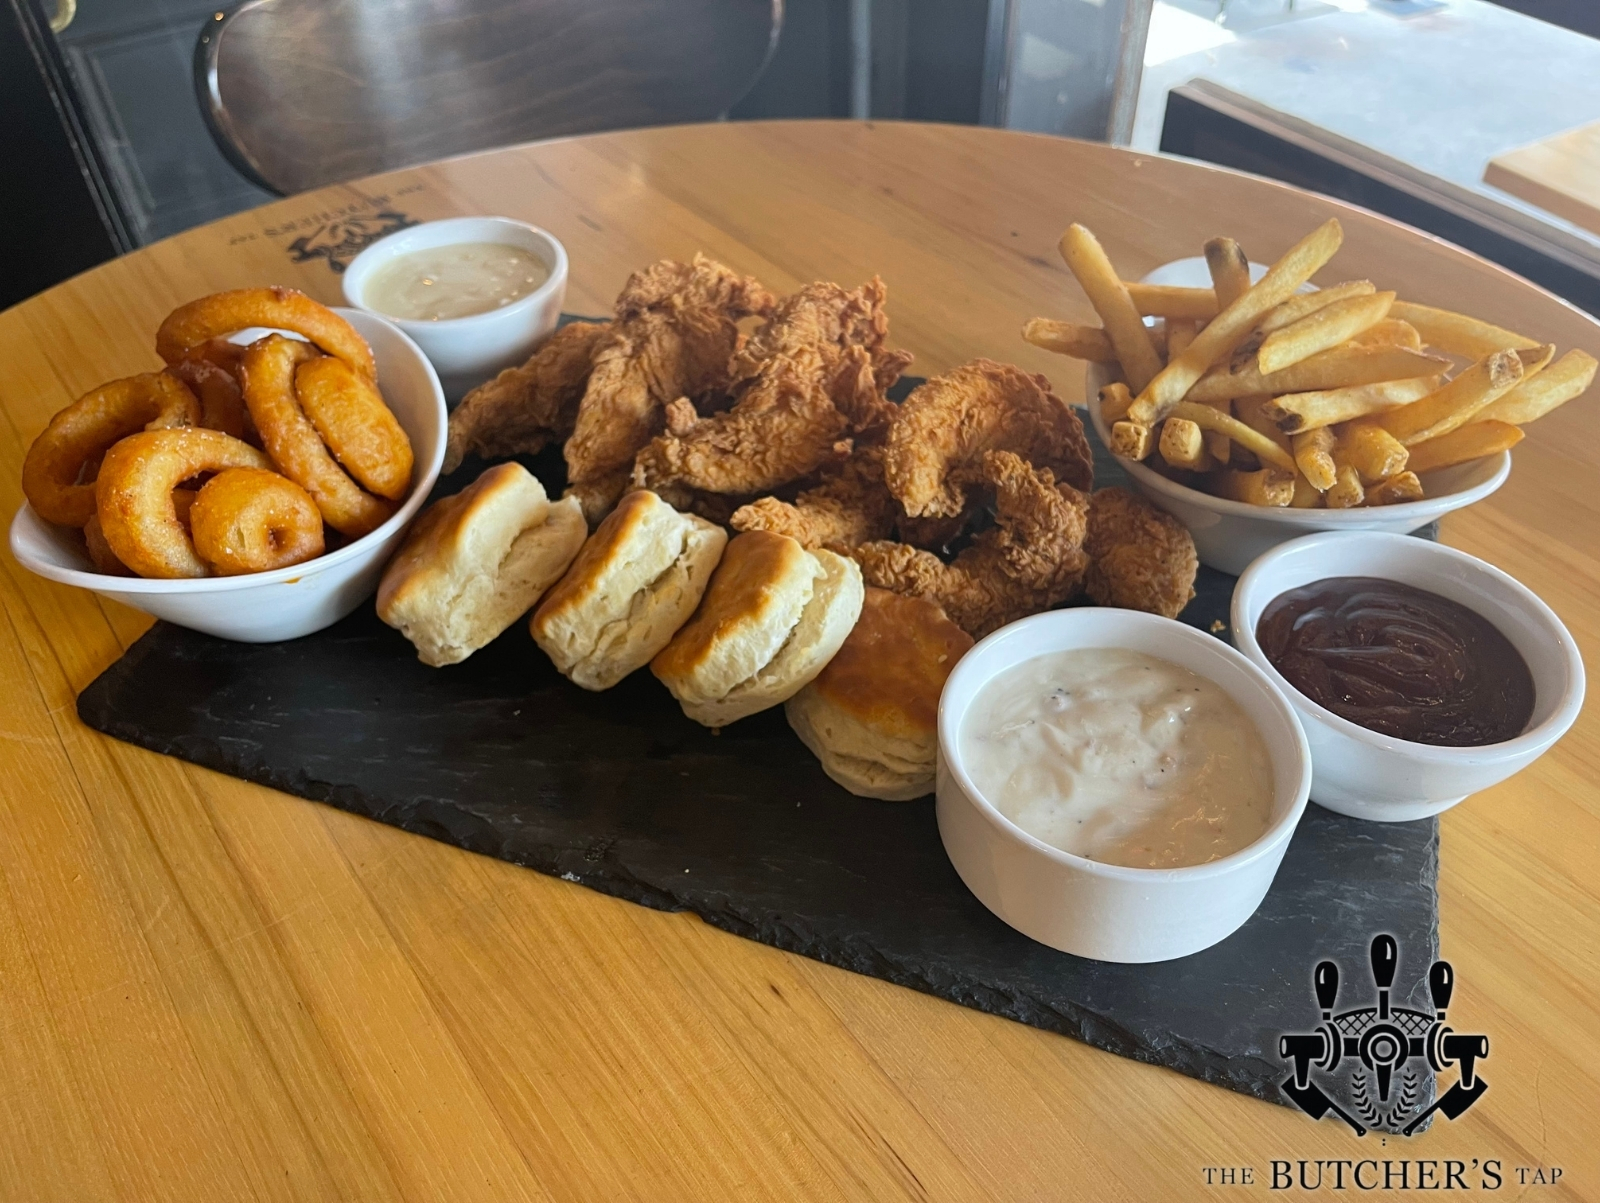 The Butcher’s Tap - Fried Chicken Picnic for 4